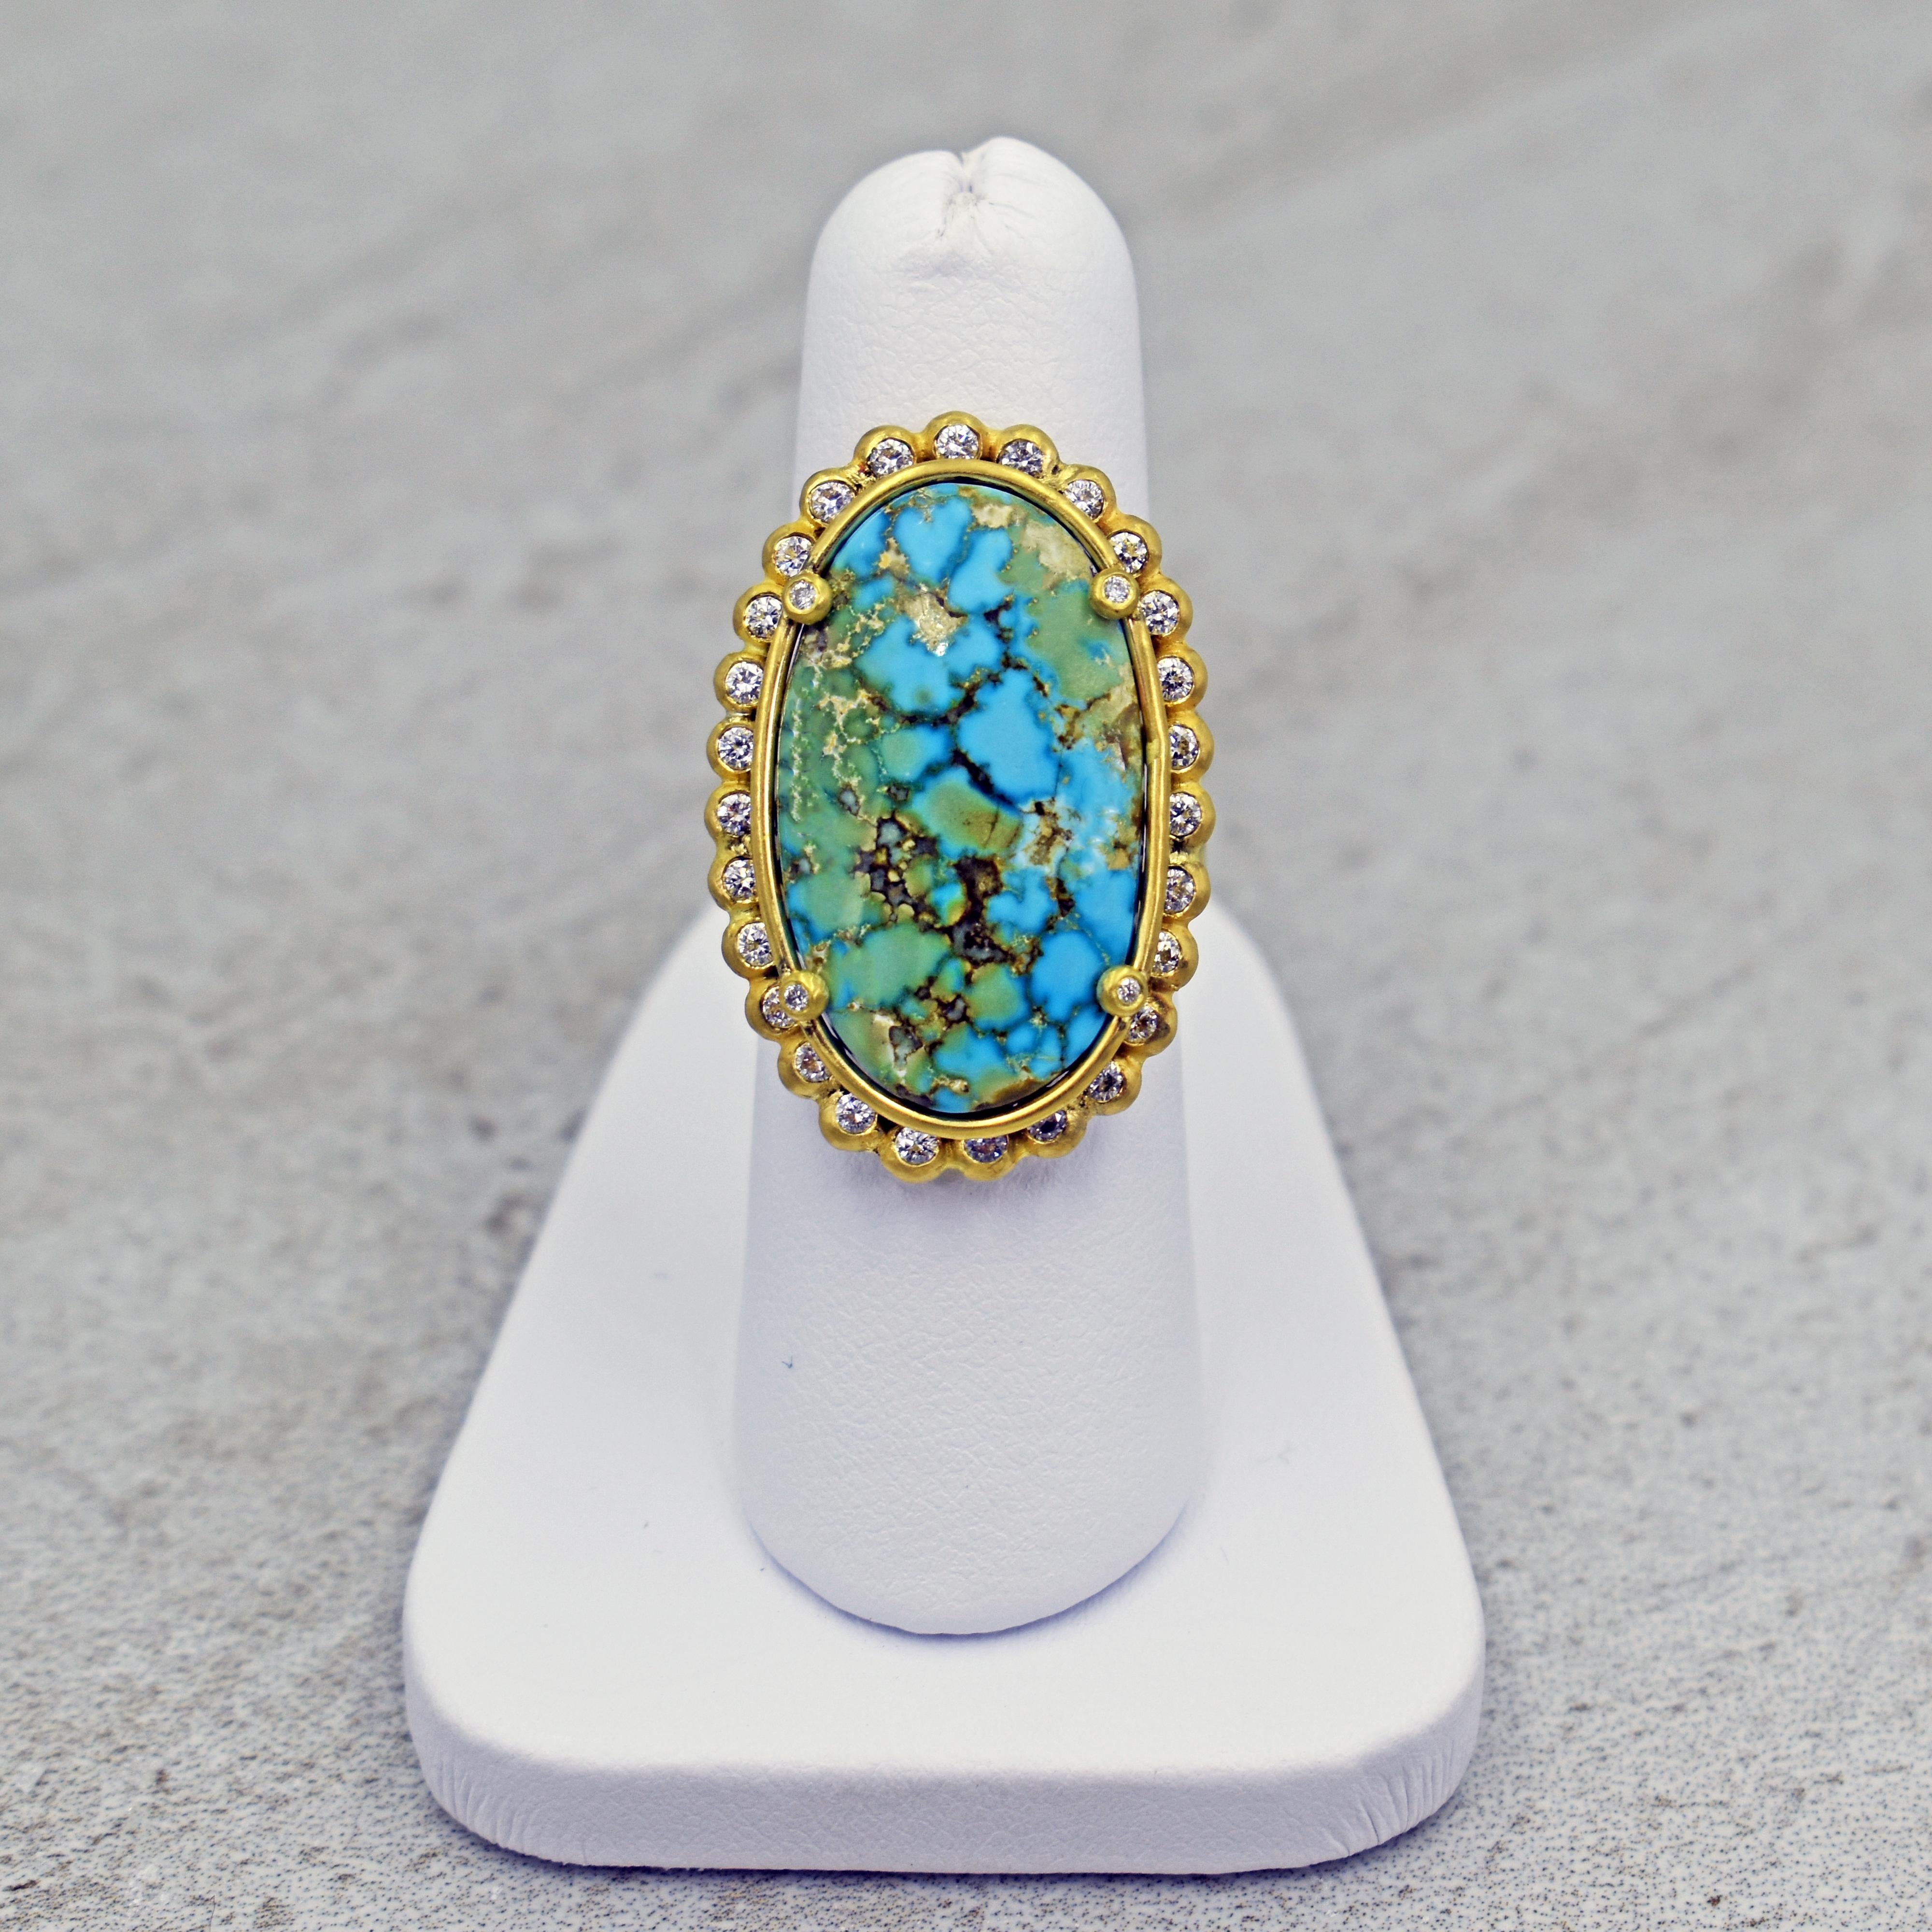 Gem-grade Turquoise Mountain center stone set in diamond halo (0.56 total carat weight, G-H, SI1) and 22k yellow gold cocktail ring. Size 7. Gorgeous, handmade statement ring featuring a beautiful turquoise gemstone from the mine in Arizona, USA. 